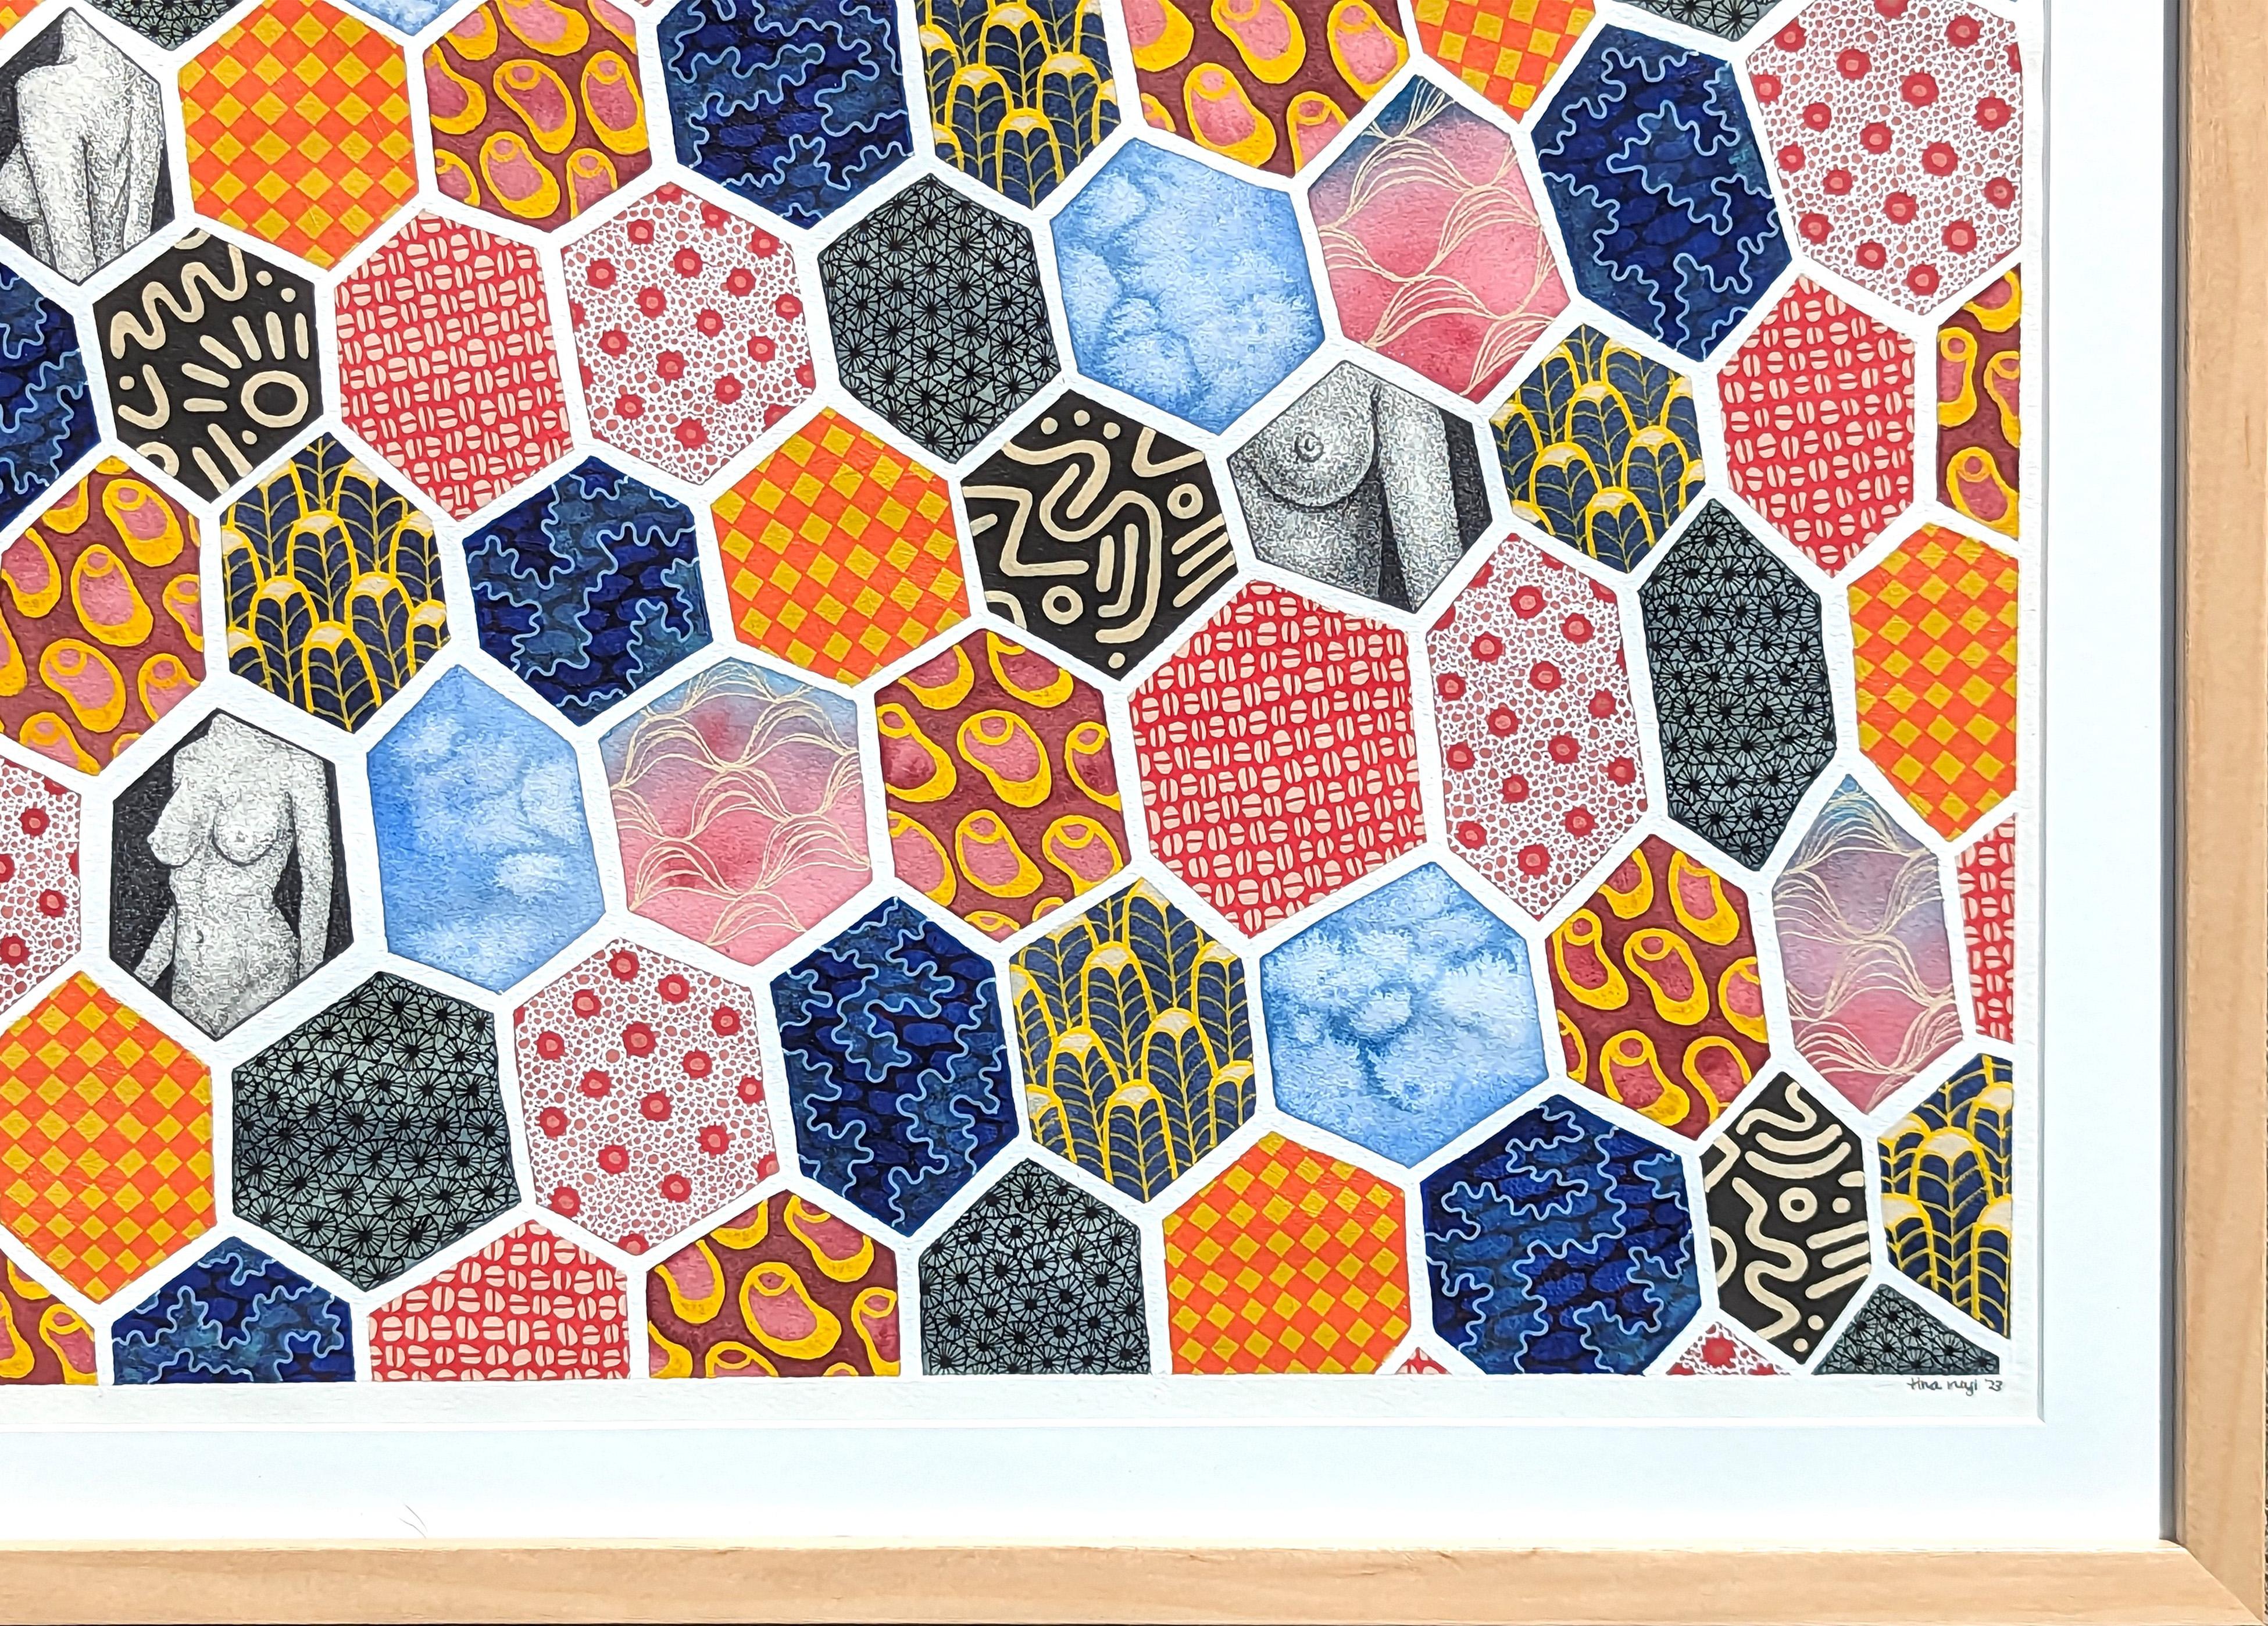 Contemporary geometric abstract watercolor painting by Texas based artist Tina Ruyi. The work features a grid of hexagonal shapes similar to a traditional quilt pattern. Each hexagon is decorated with different patterns and nude sketches of a nude